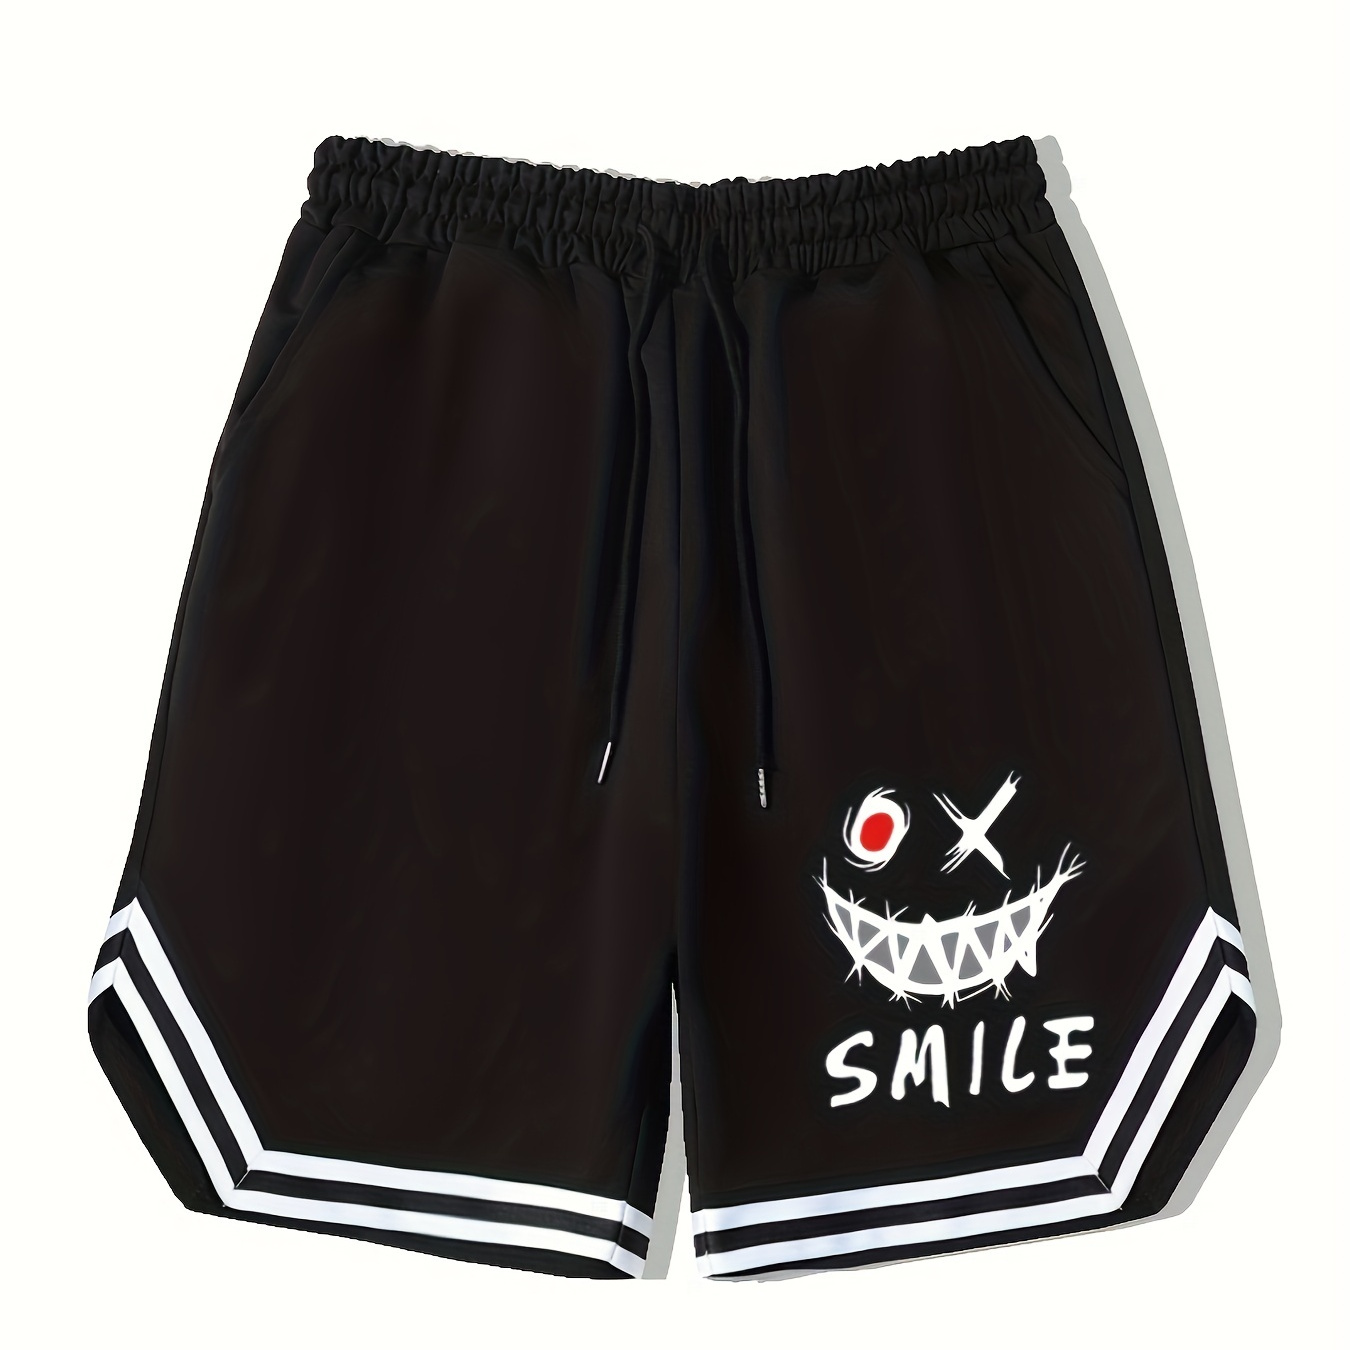 

Men's Graffiti Smile Graphic Basketball Shorts, Casual Slightly Stretch Breathable Drawstring Shorts, Men's Clothing For Summer Outdoor